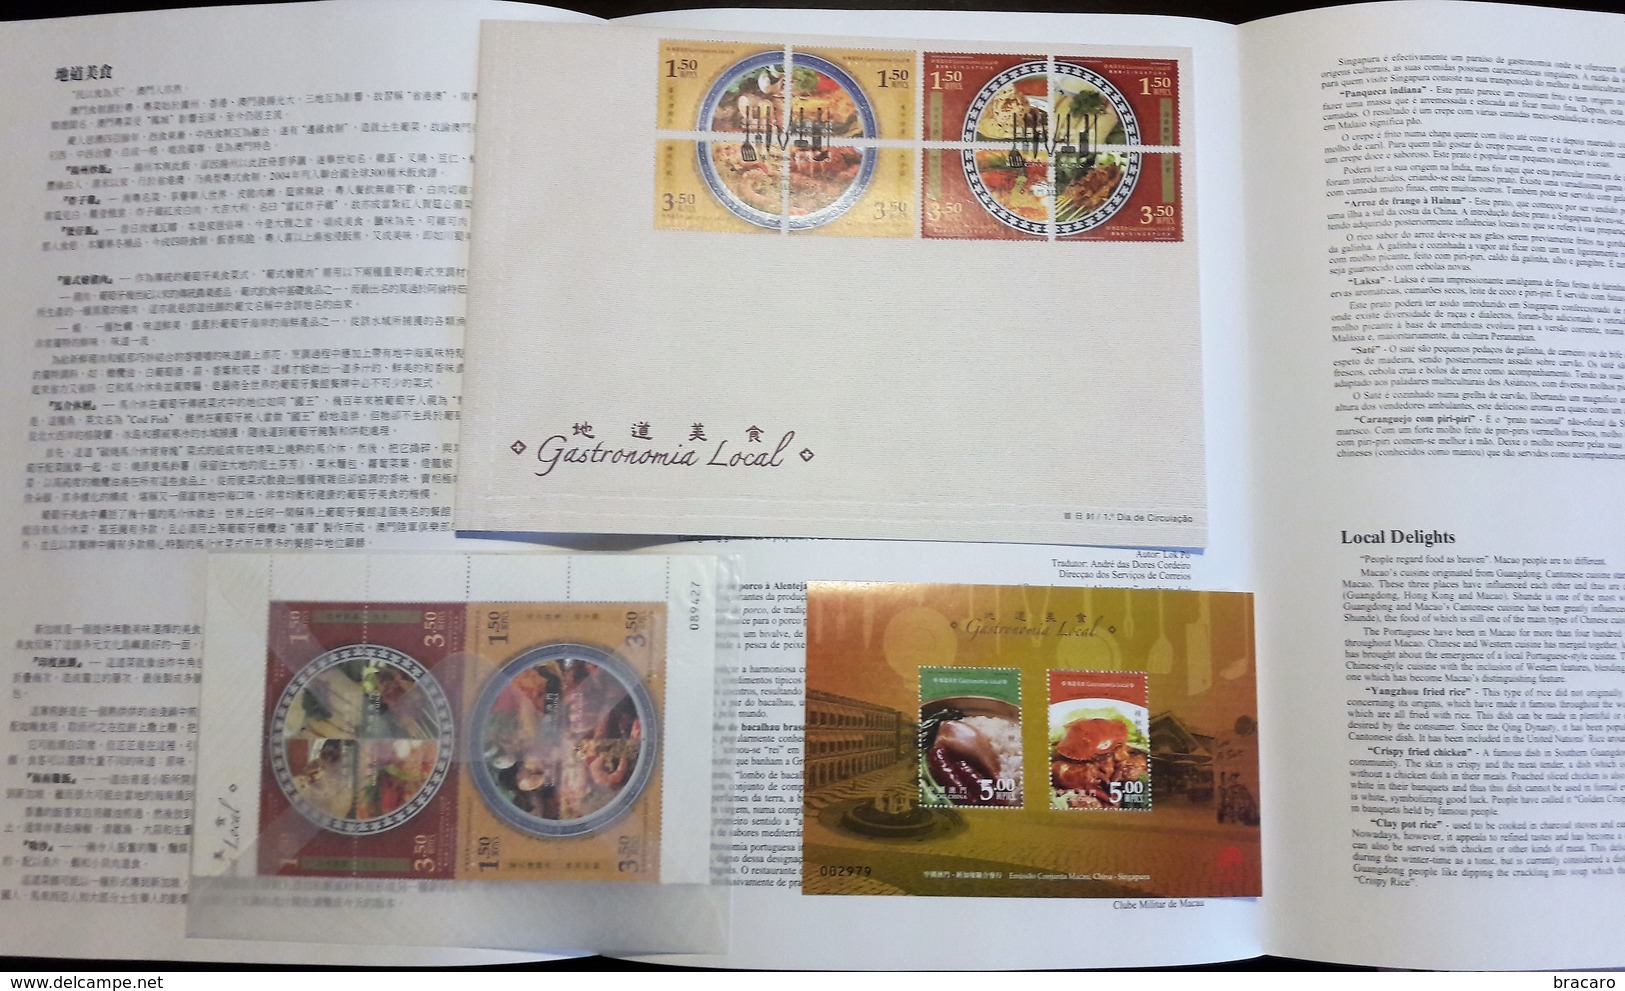 MACAU / MACAO (CHINA) - Local Delights - 2008 - Block MNH + Full Set Stamps MNH + FDC + Leaflet - Collections, Lots & Séries